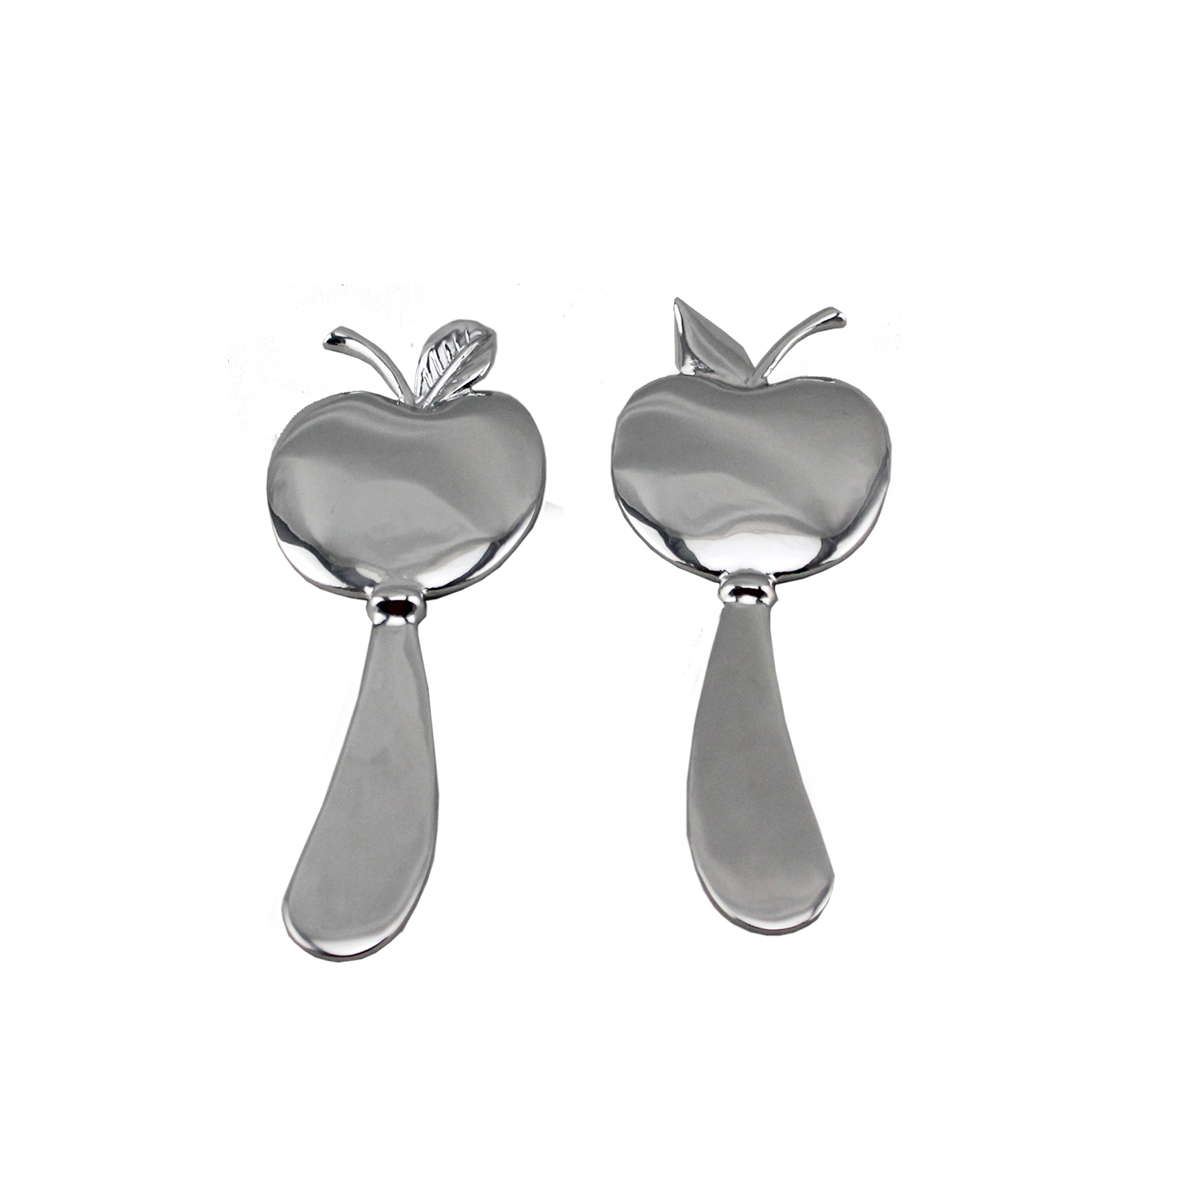 Cheese knife with apple decoration